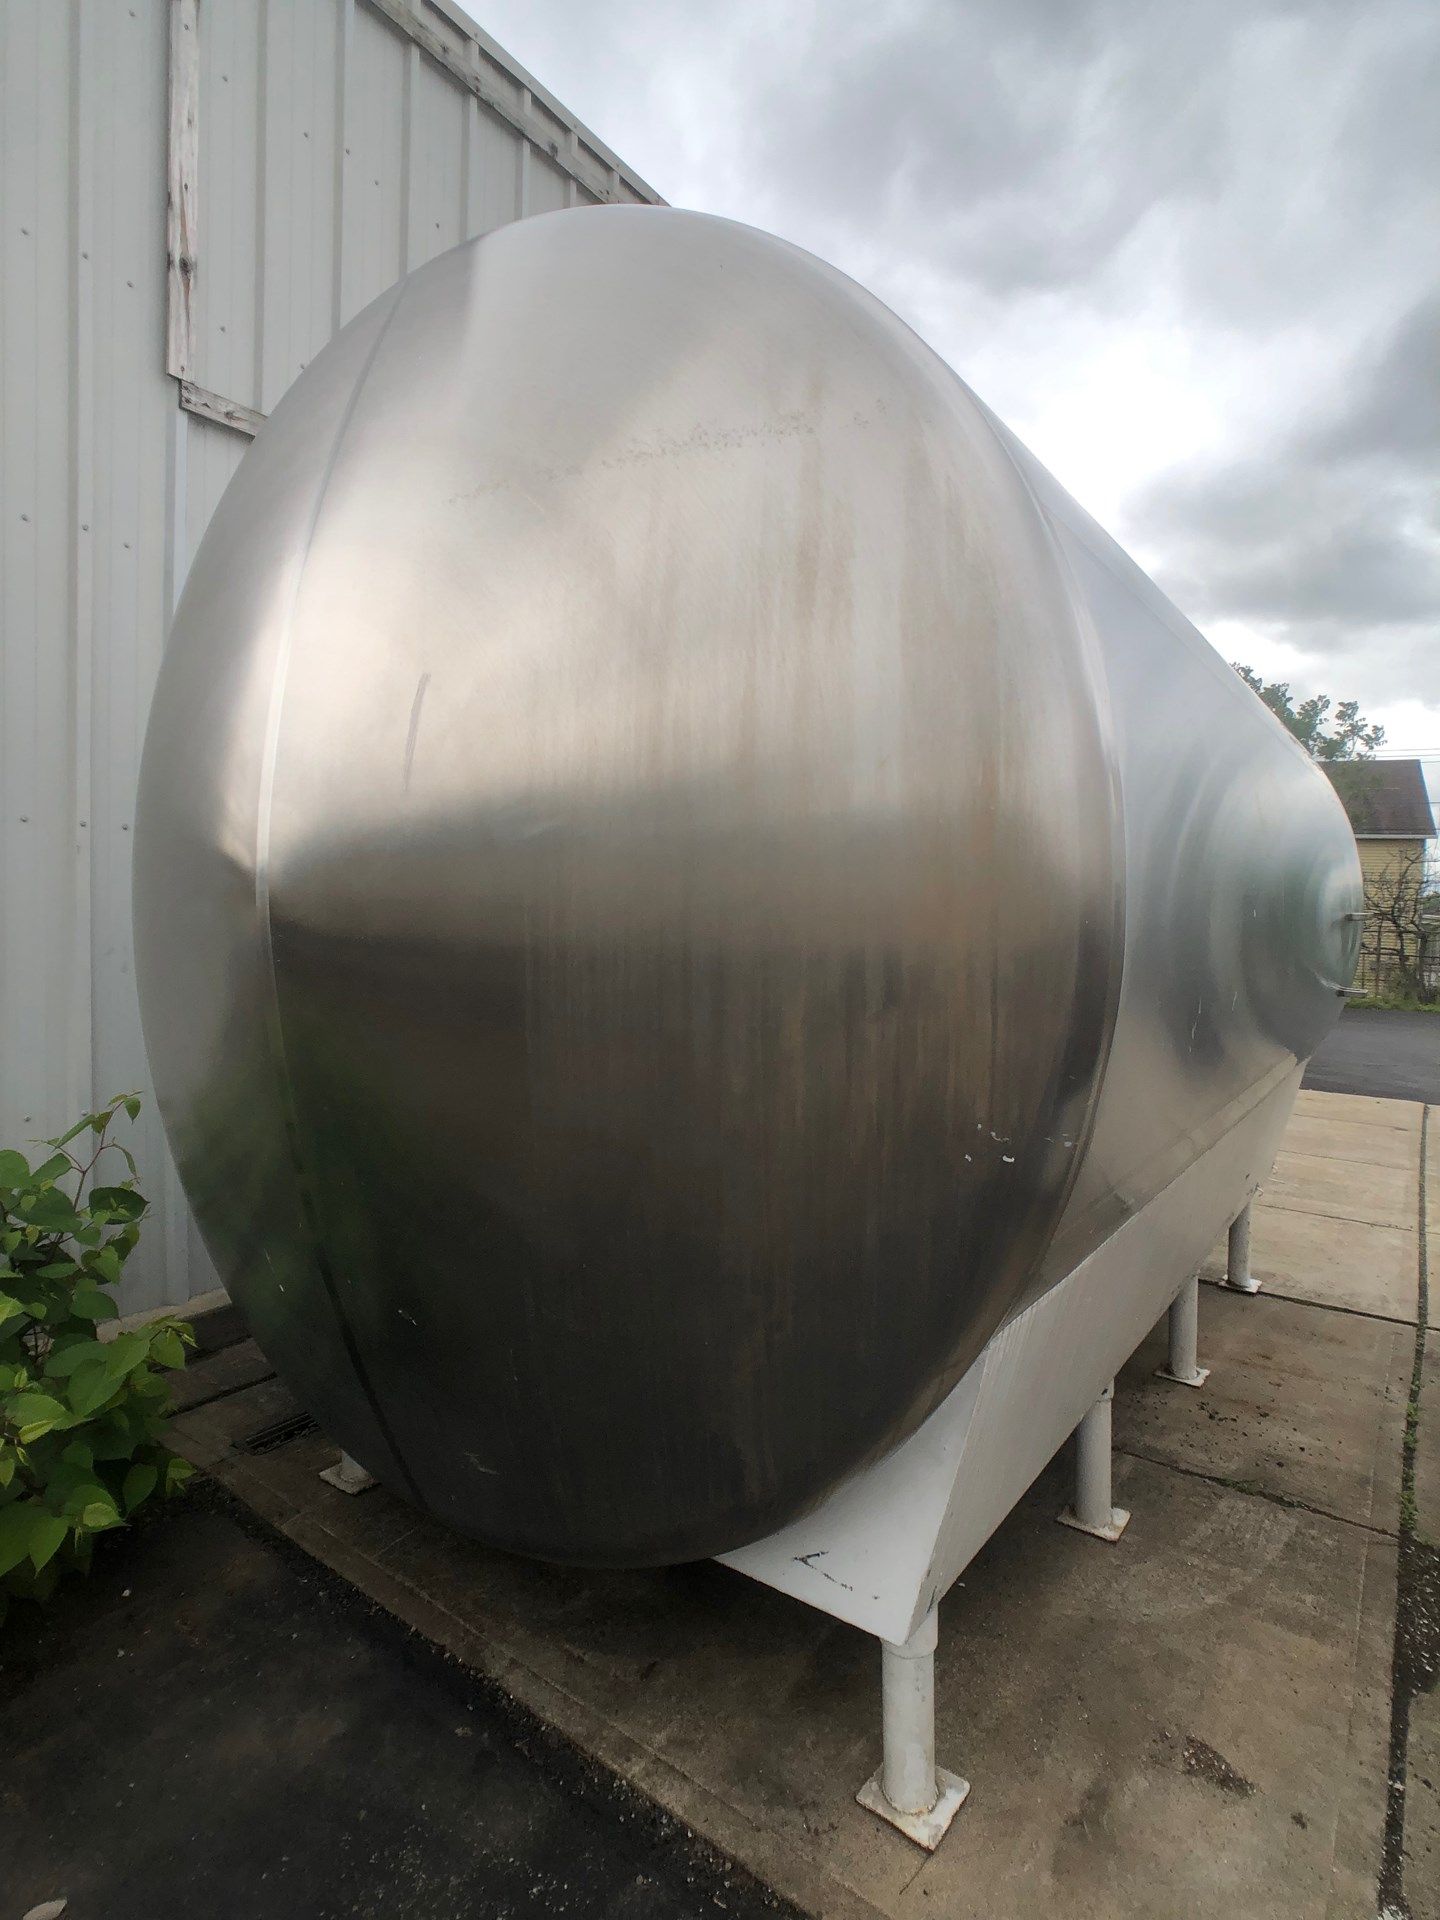 Cherry Burrell 5,000 Gal. S/S Horizontal Single Wall Tank, M/N HC, Equipped with Horizontal - Image 4 of 10